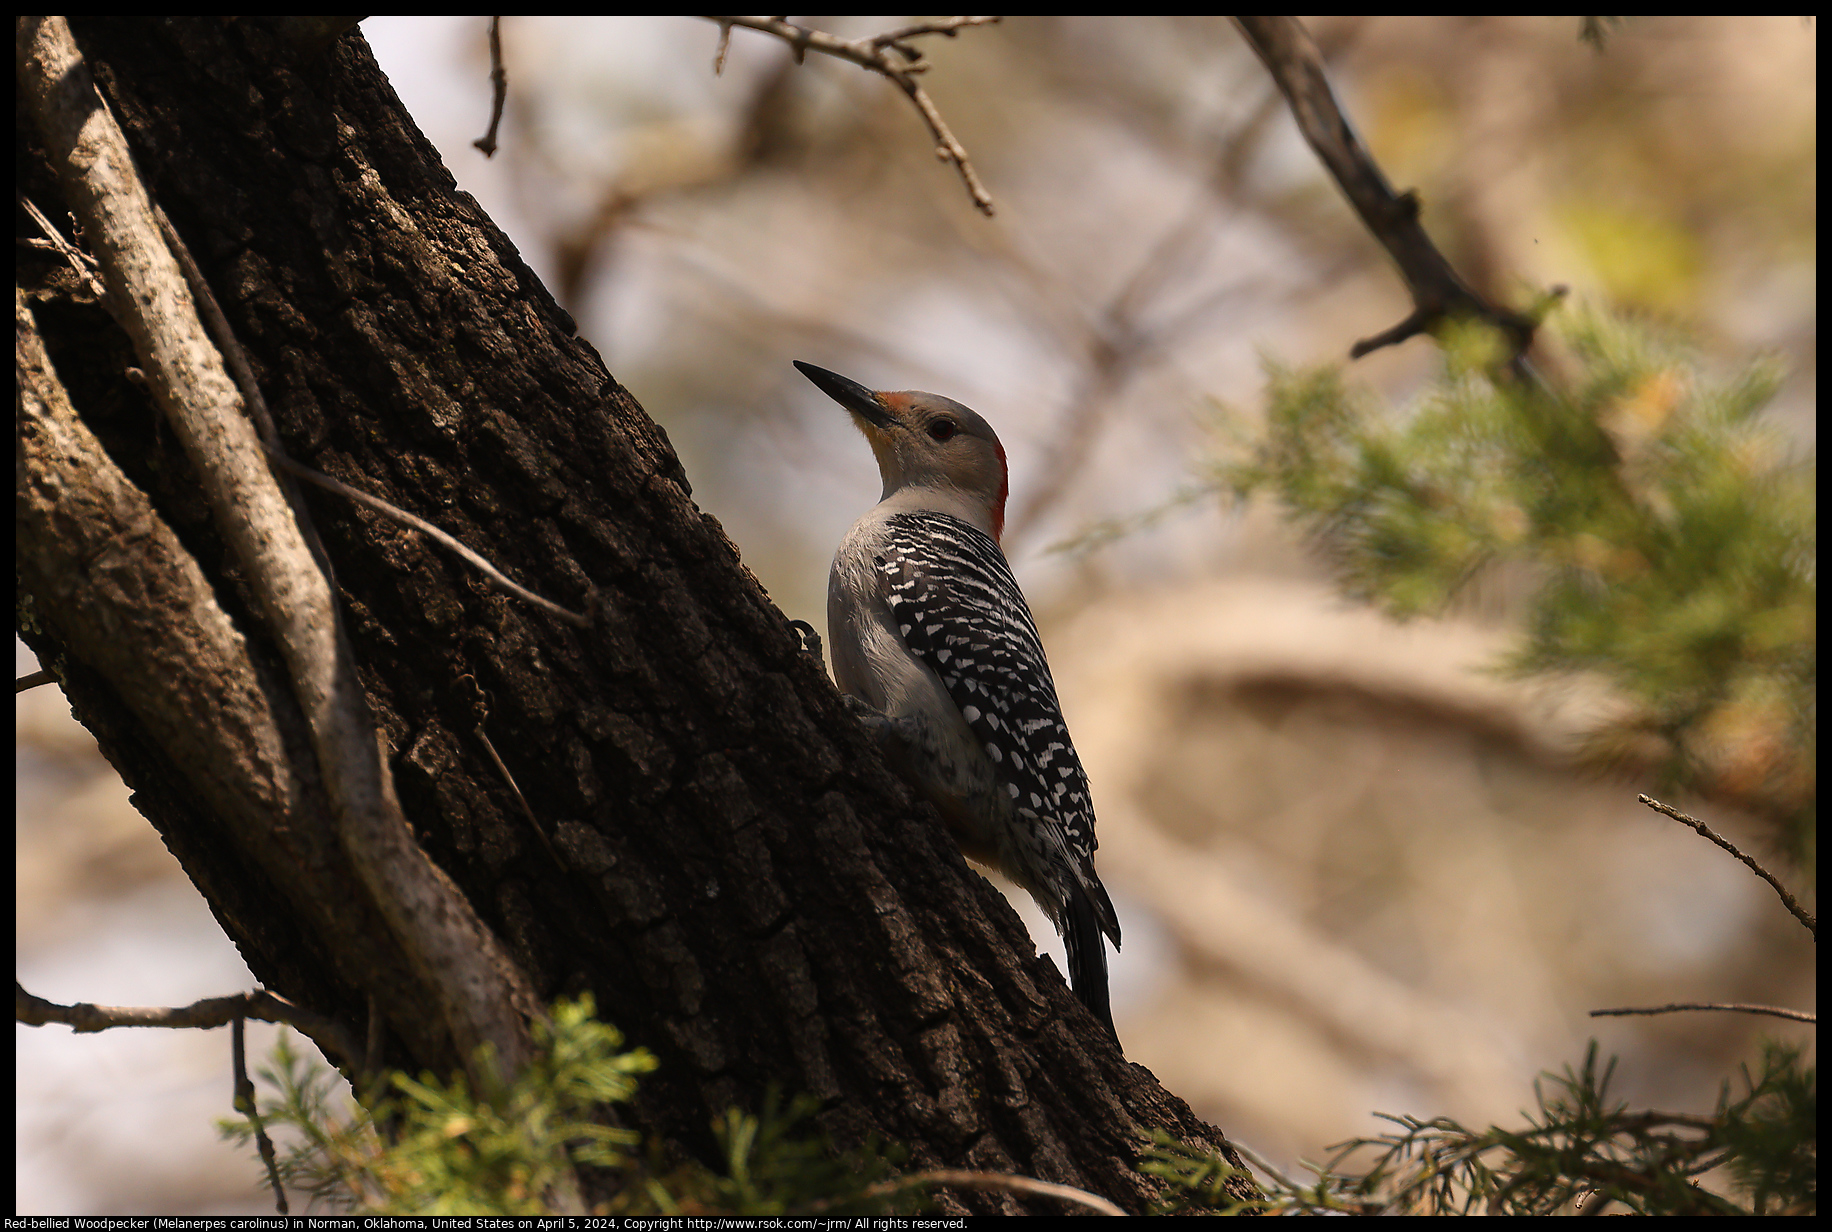 Red-bellied Woodpecker (Melanerpes carolinus) in Norman, Oklahoma, United States on April 5, 2024